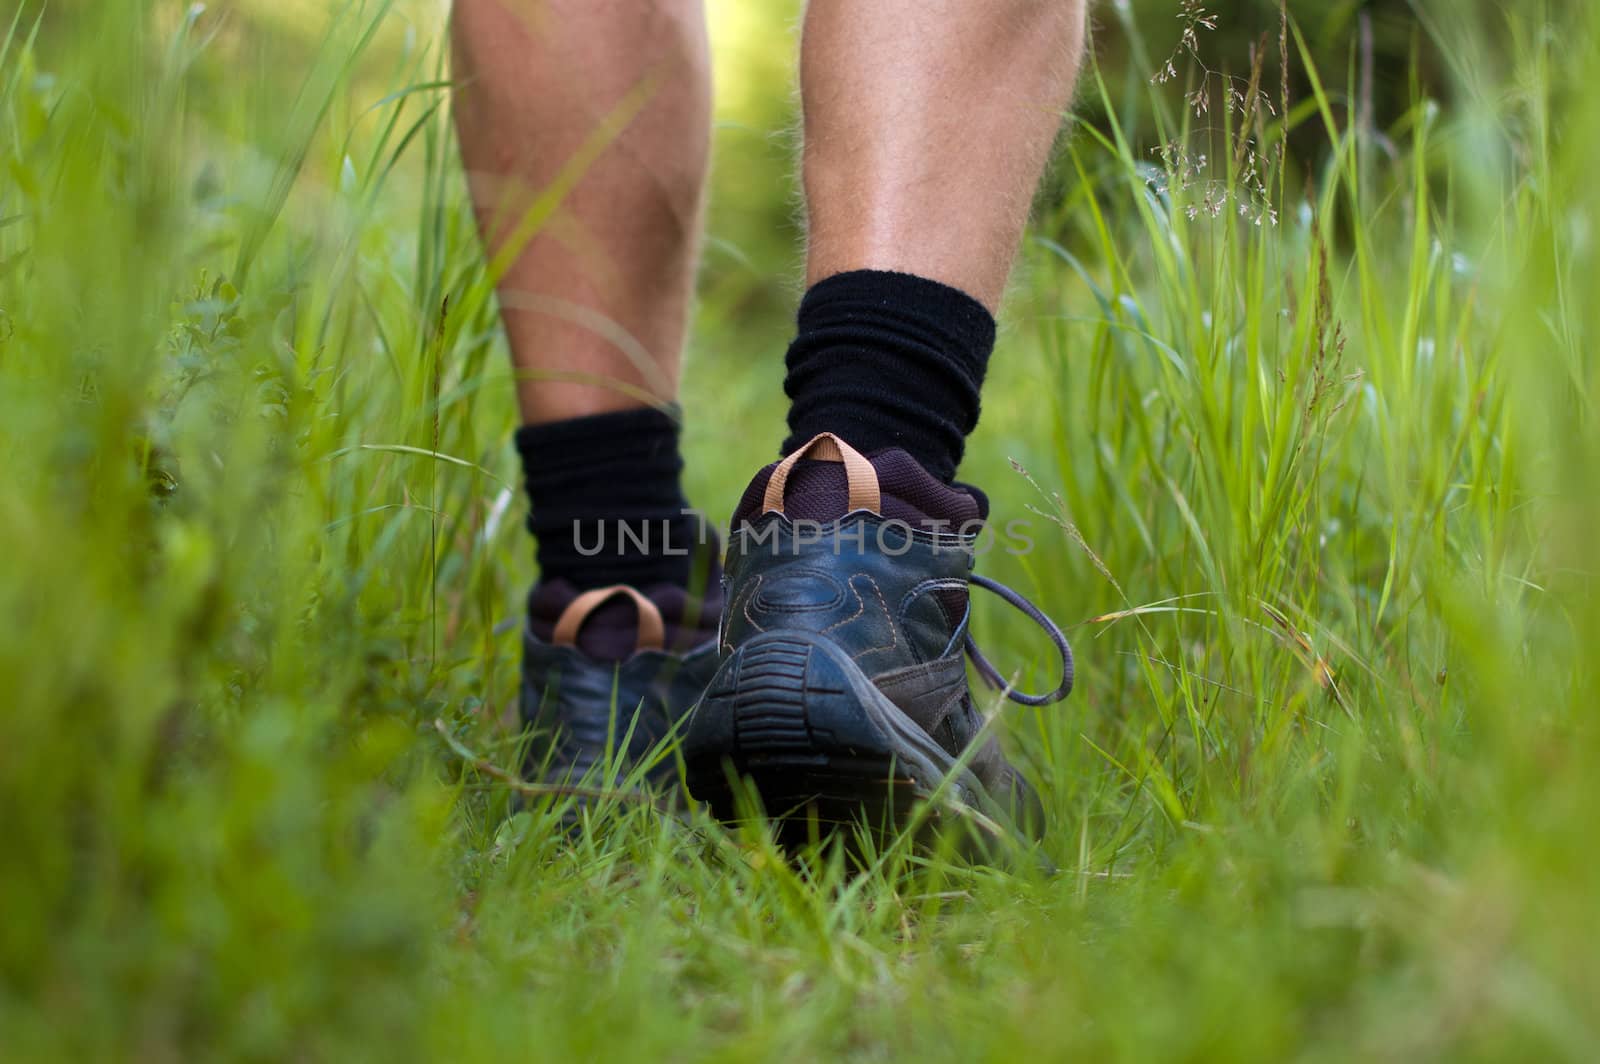 Hiking boots in a grass